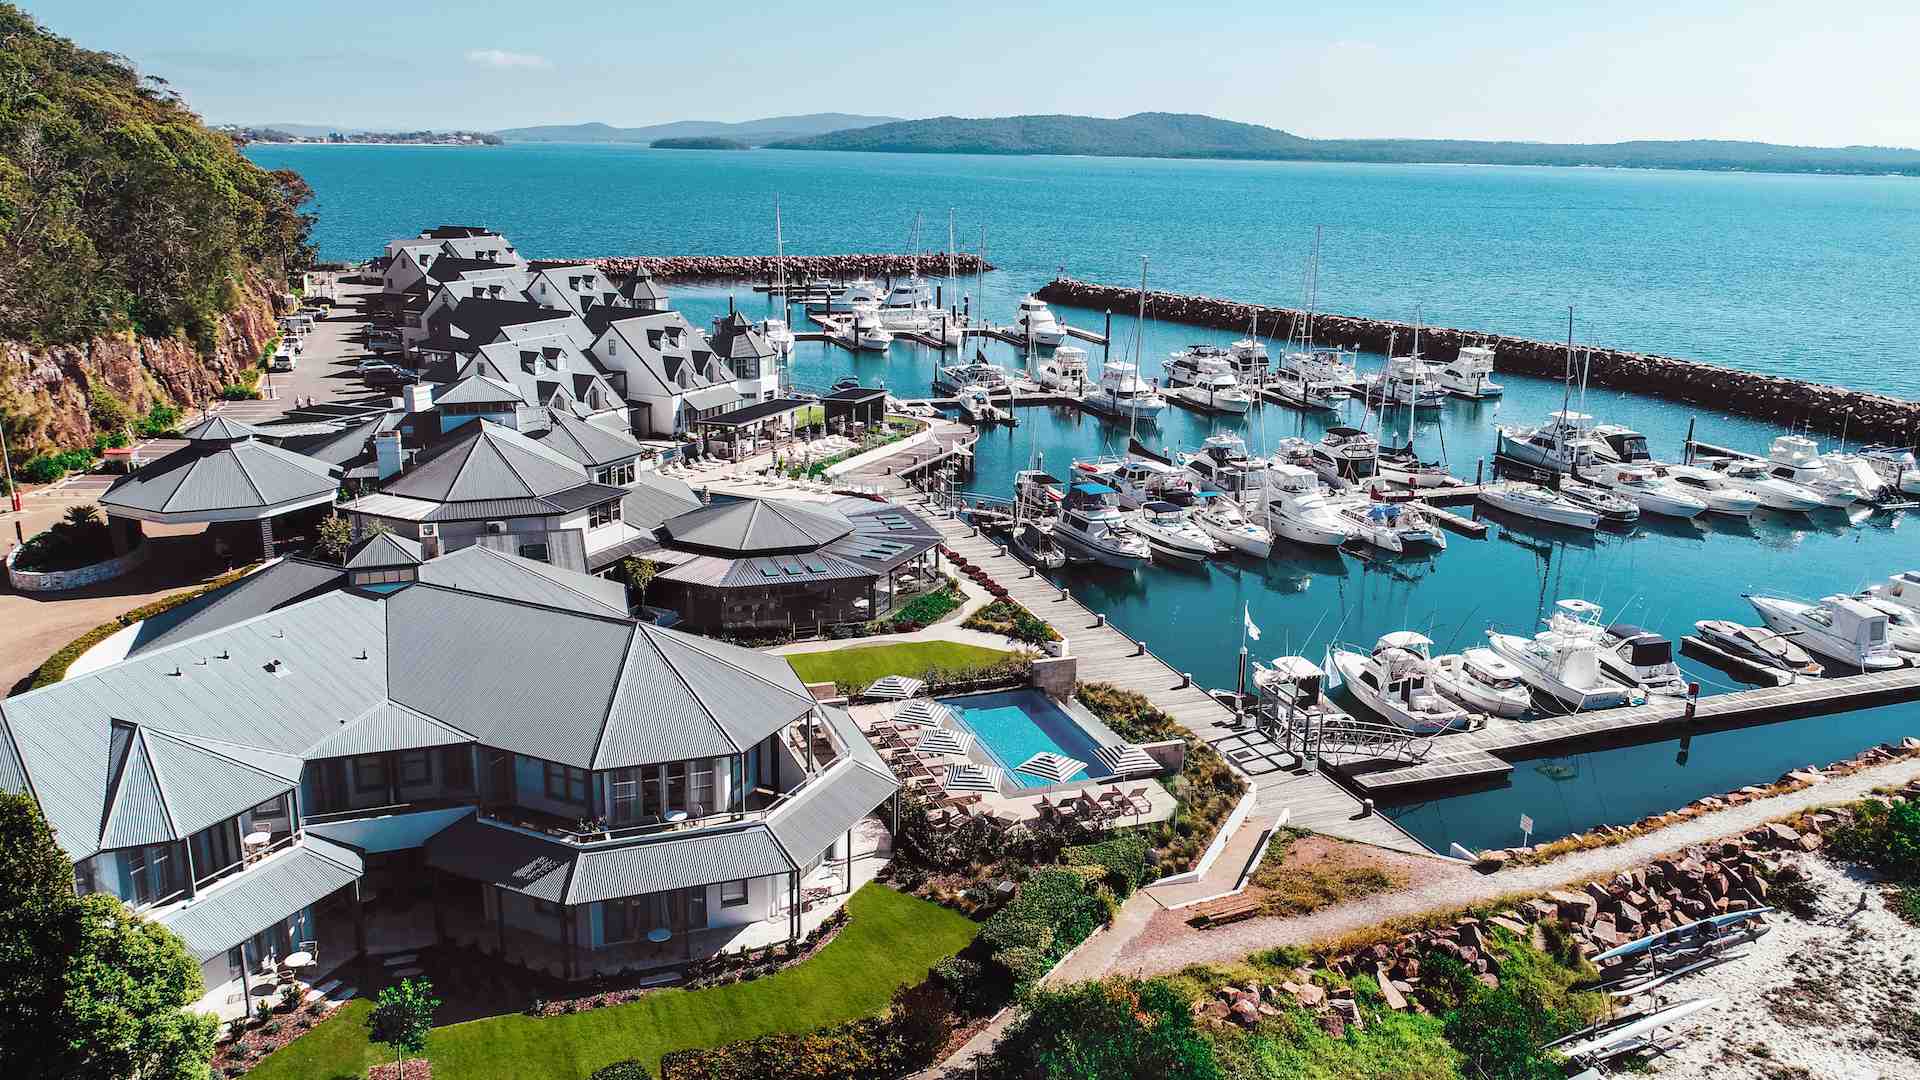 We're Giving Away a Night at a Port Stephens Hamptons-Chic Hotel So You Can Max Out on Seafood and Sea Views